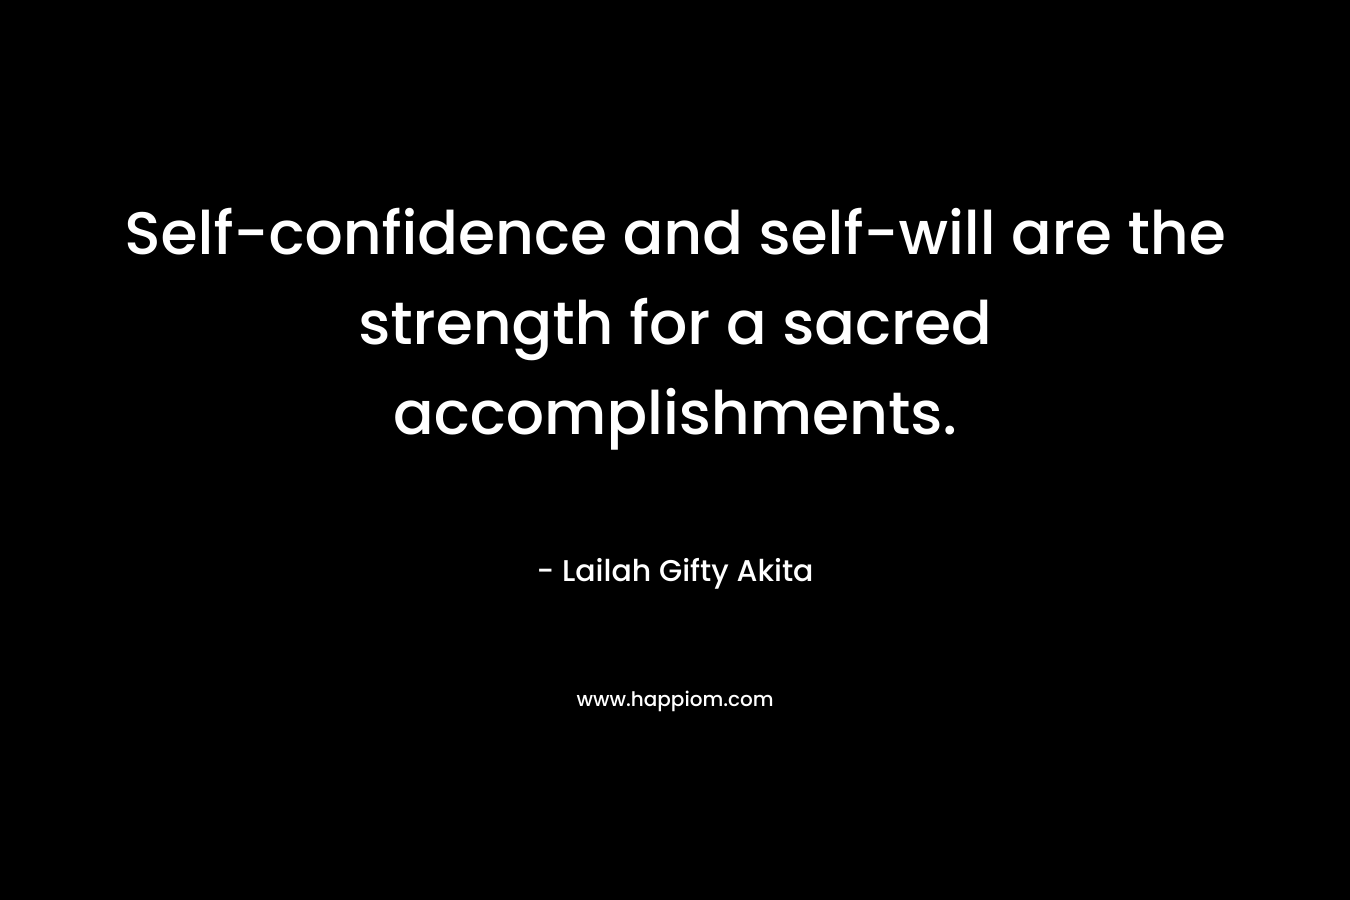 Self-confidence and self-will are the strength for a sacred accomplishments.